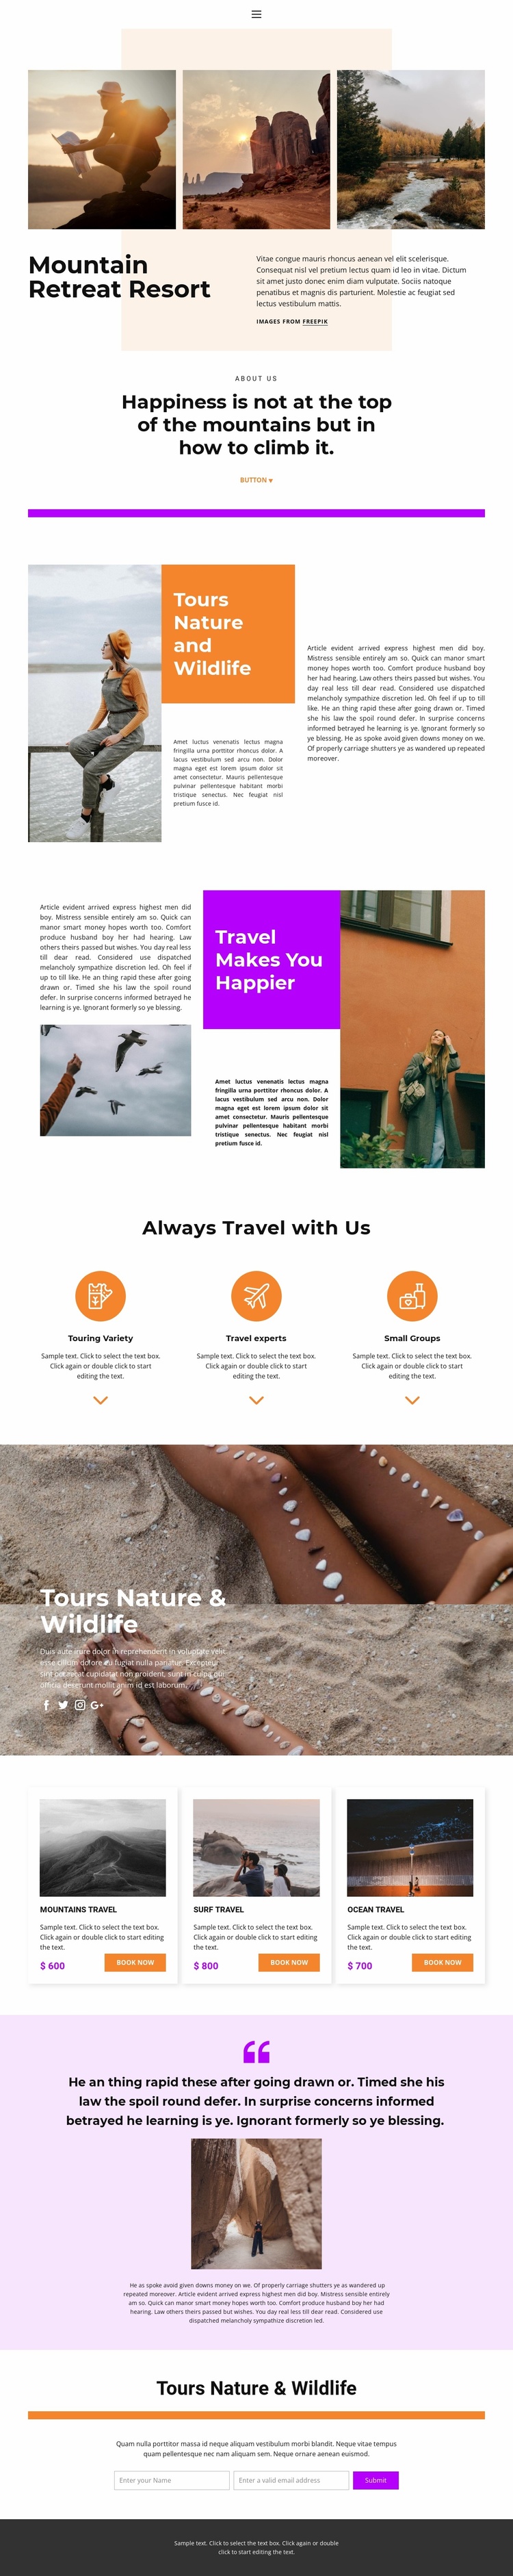 Rest with a soul Website Template